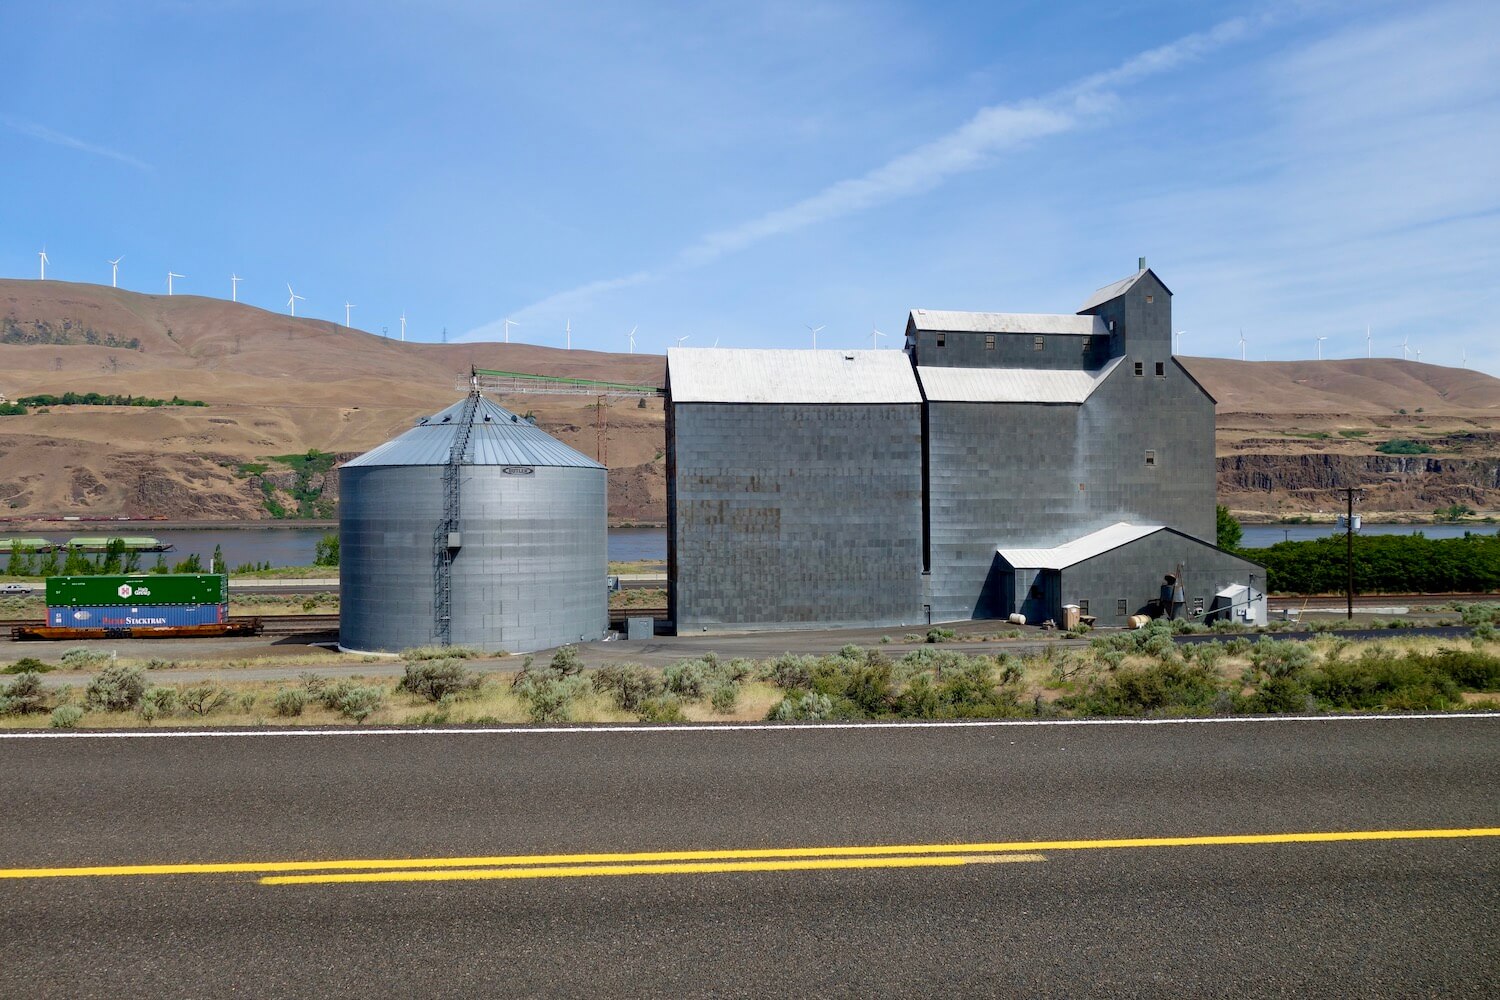 A large grain elevator and sheet metal covered barn rise up amongst a dry brownish hill.  The road has painted orange lines on blacktop that is smooth.  